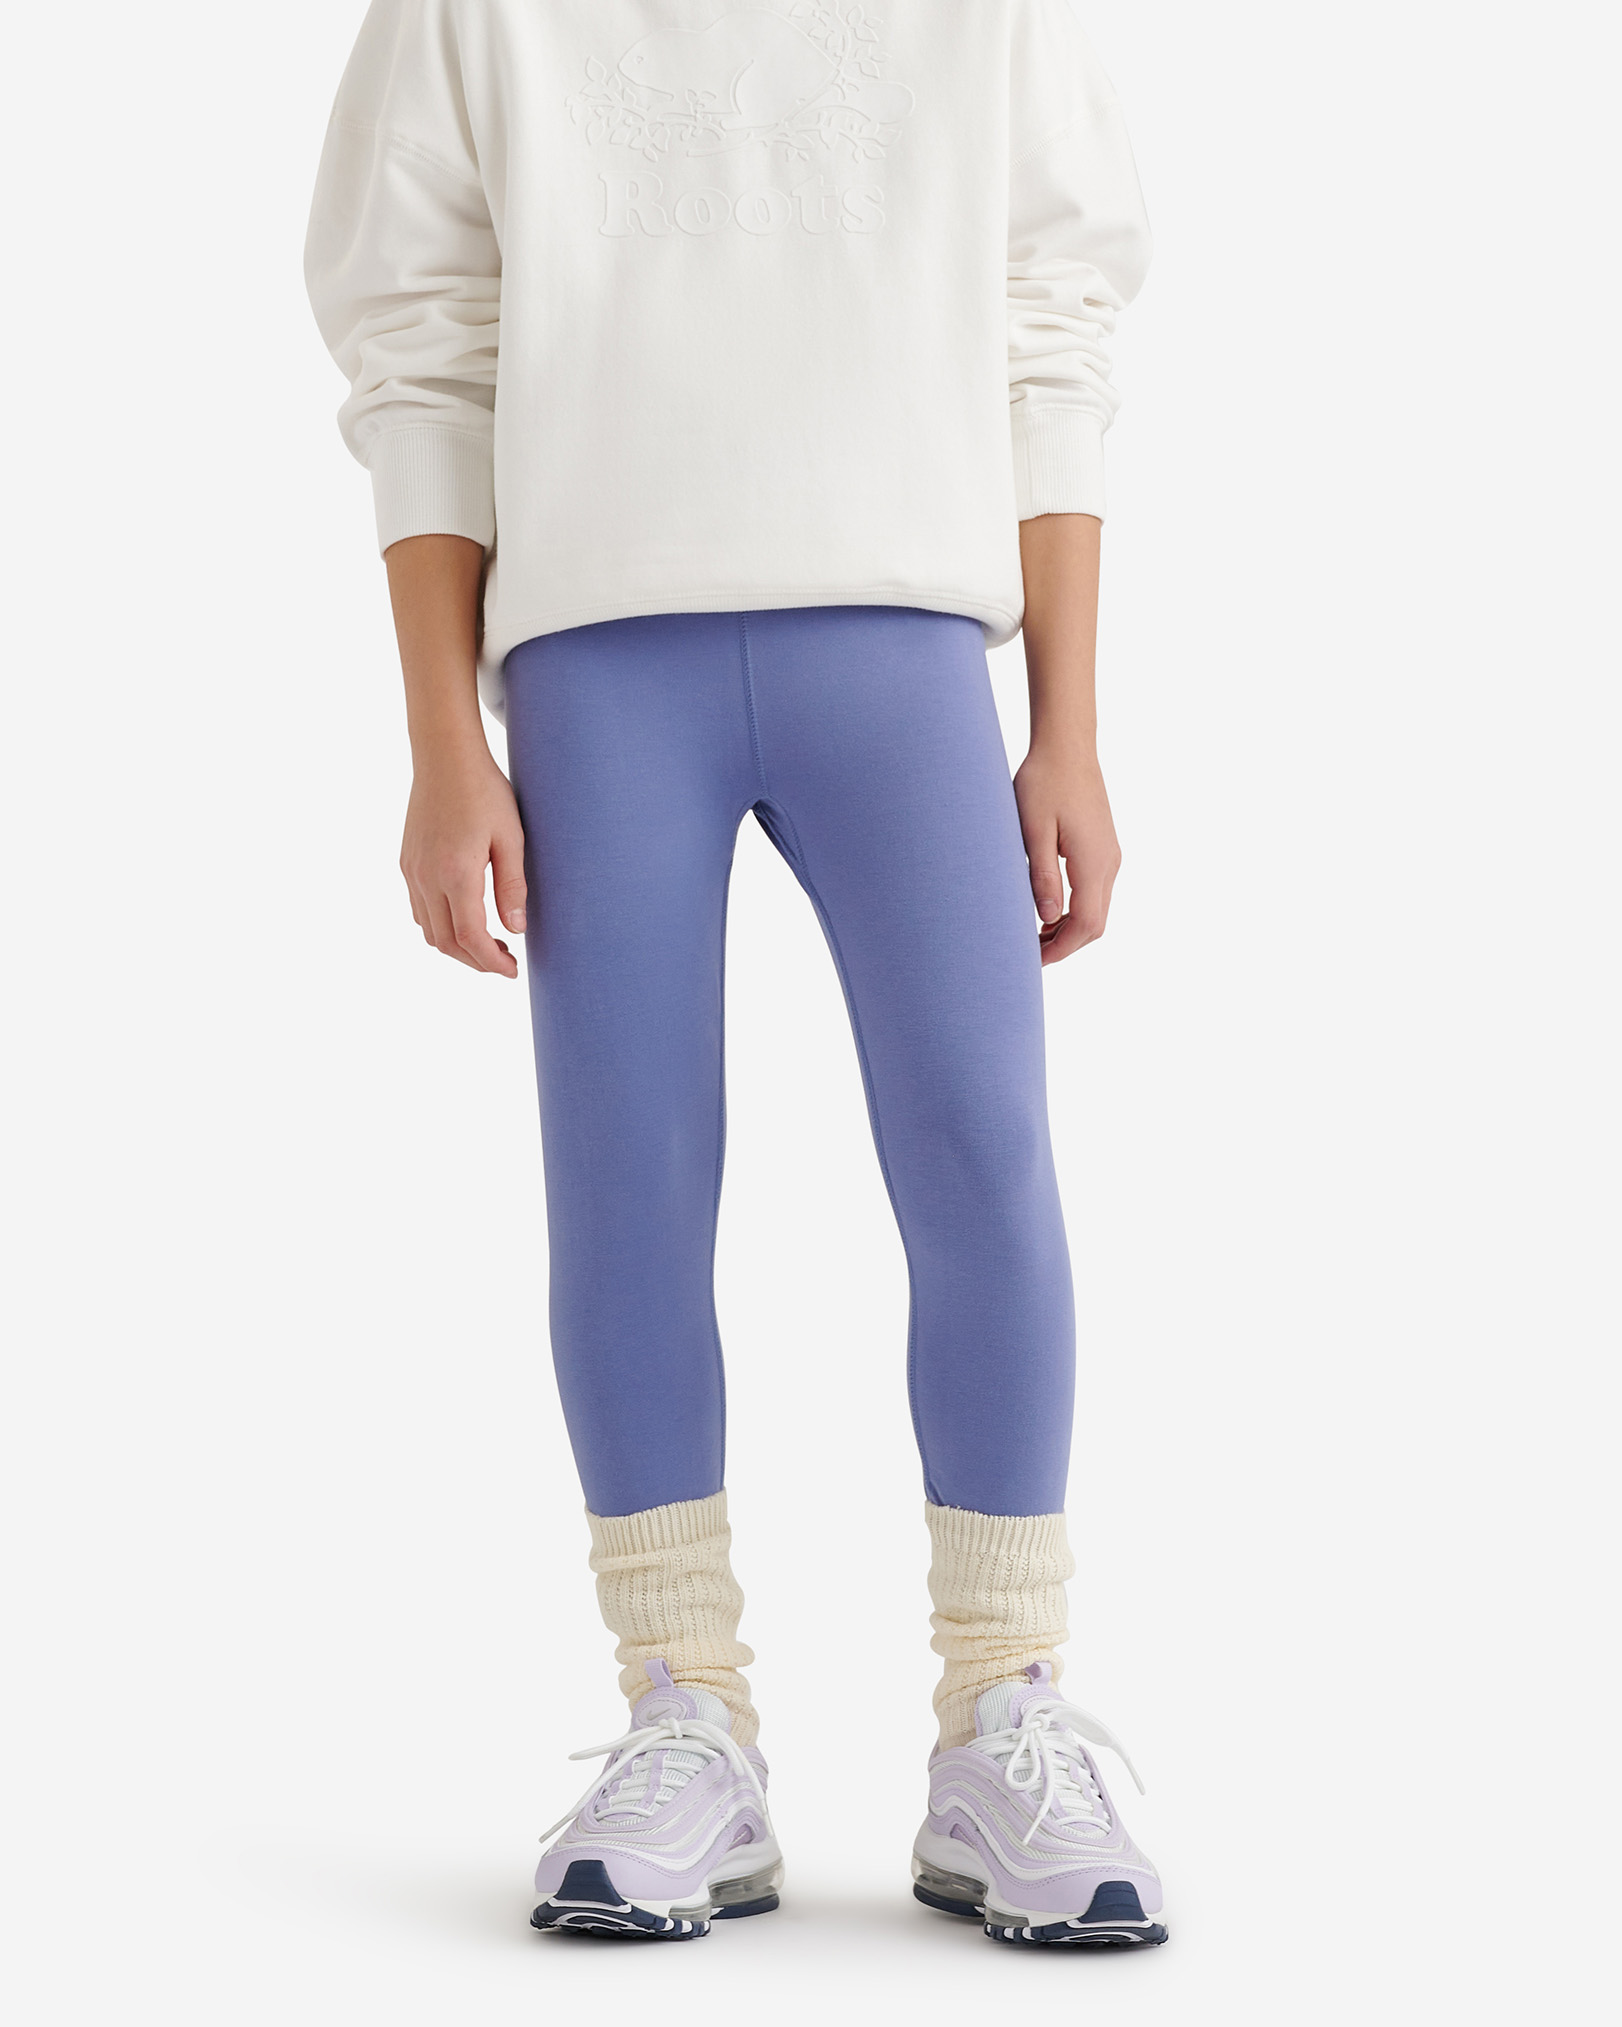 Roots Girl's Essential Ankle Legging Pants in Periwinkle Purple